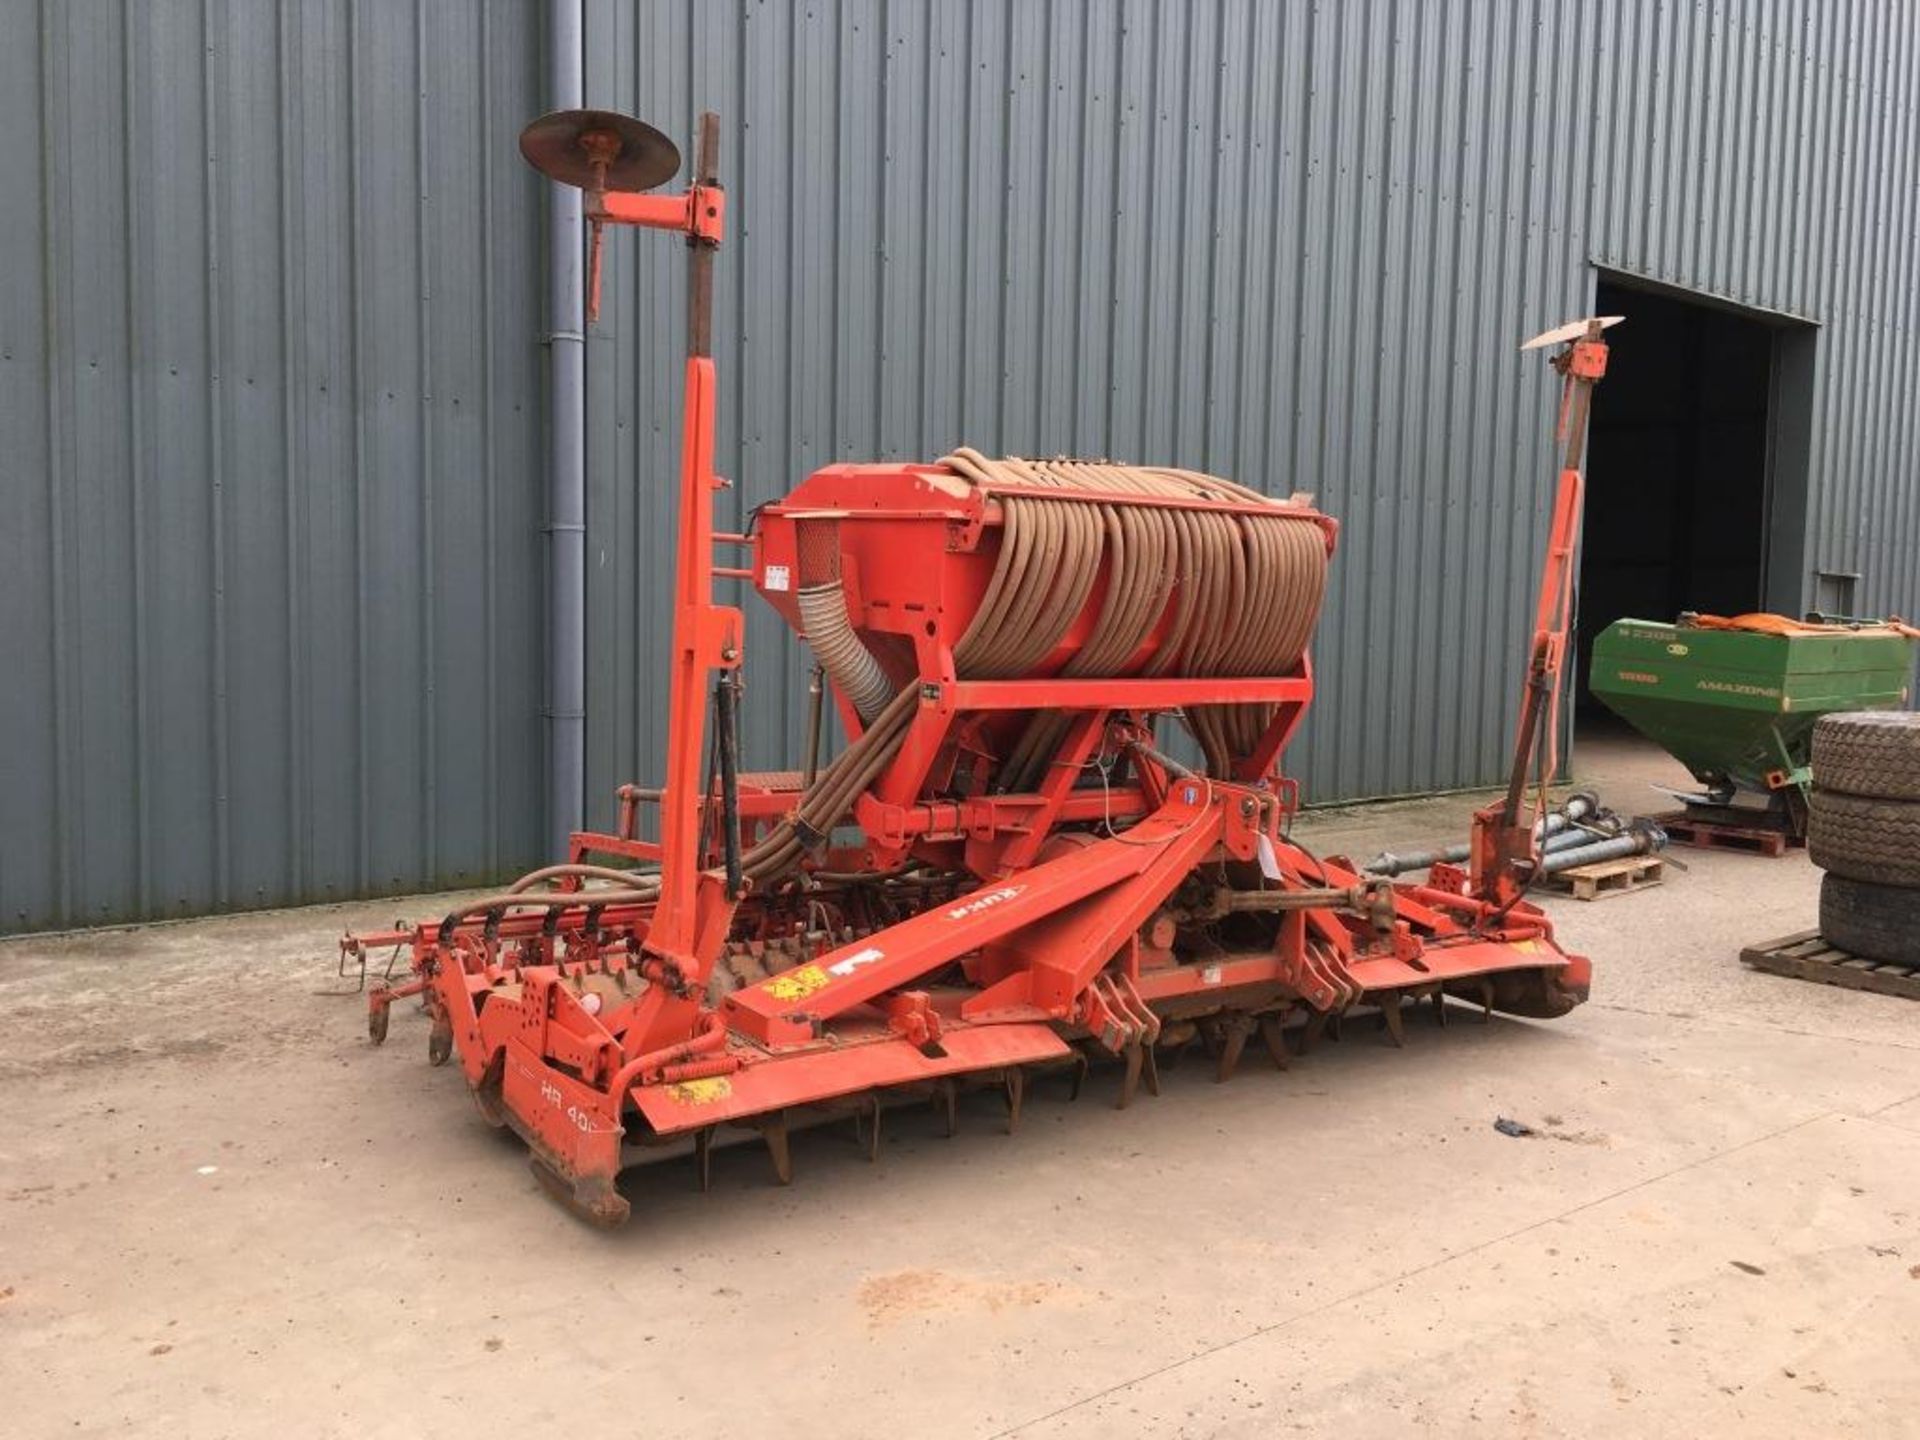 Kuhn HR 4003D 14' power harrow, serial number: A4631 (2002) with Kuhn Venta LC 402 seed drill,